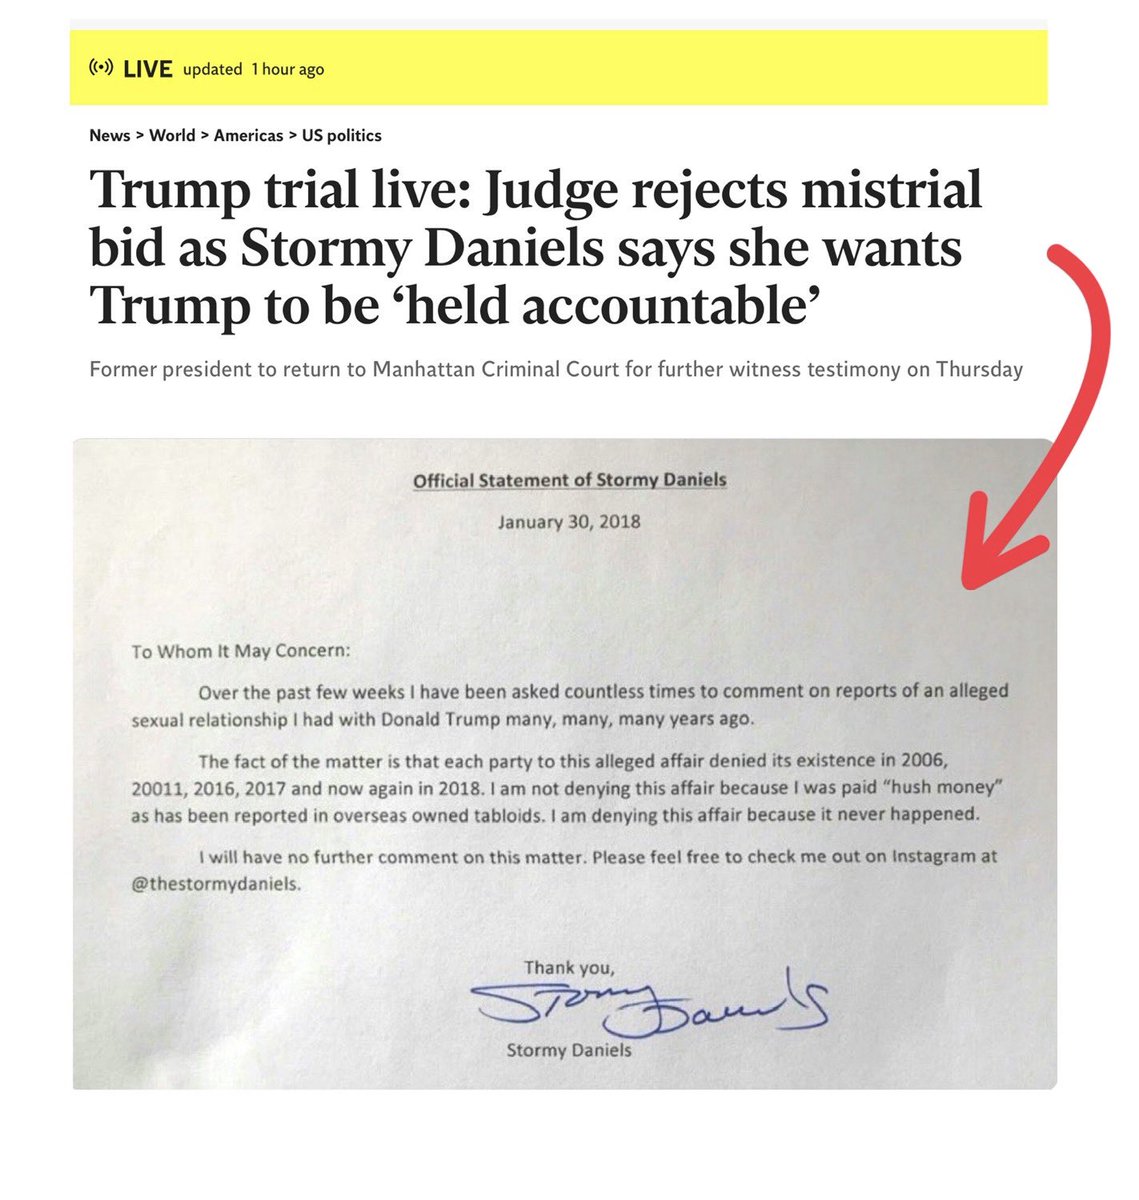 🇺🇸 Corrupt Judge Merchan threatened to jail Trump if he didn't remove this from his social media and seems to disregard this signed statement from 2018. 🤨